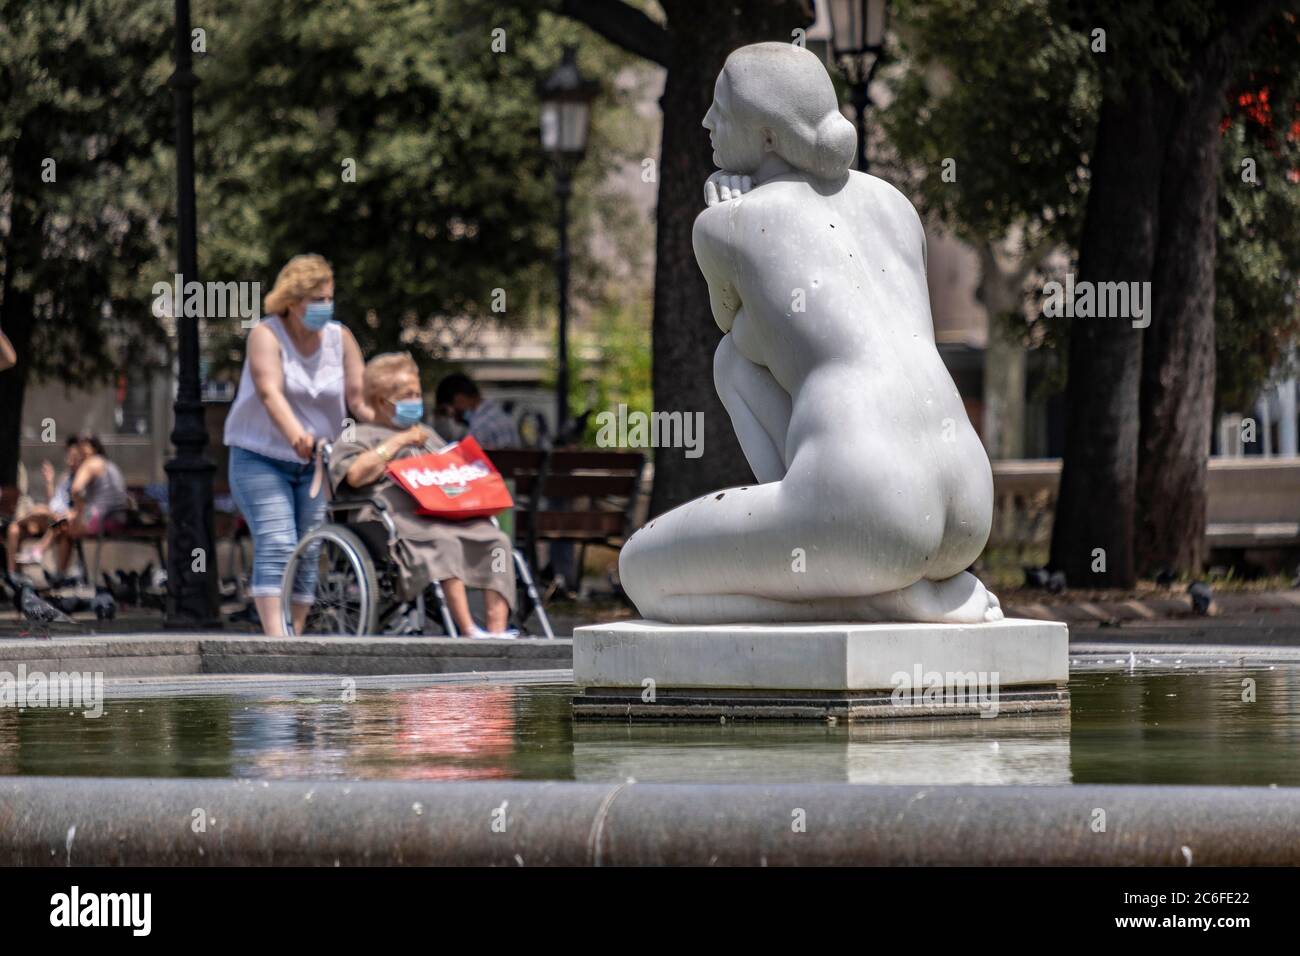 Barcelona, Catalonia, Spain. 9th July, 2020. Two people seen next to the sculpture La Diosa by the sculptor Josep ClarÃ i Ayats in Plaza Catalunya while wearing face masks as a precaution against the spread of the coronavirus during the pandemic.Catalonia will fine whoever does not wear a sanitary mask in public space with 100 euros, as a measure due to the Covid-19 outbreak. Credit: Paco Freire/SOPA Images/ZUMA Wire/Alamy Live News Stock Photo